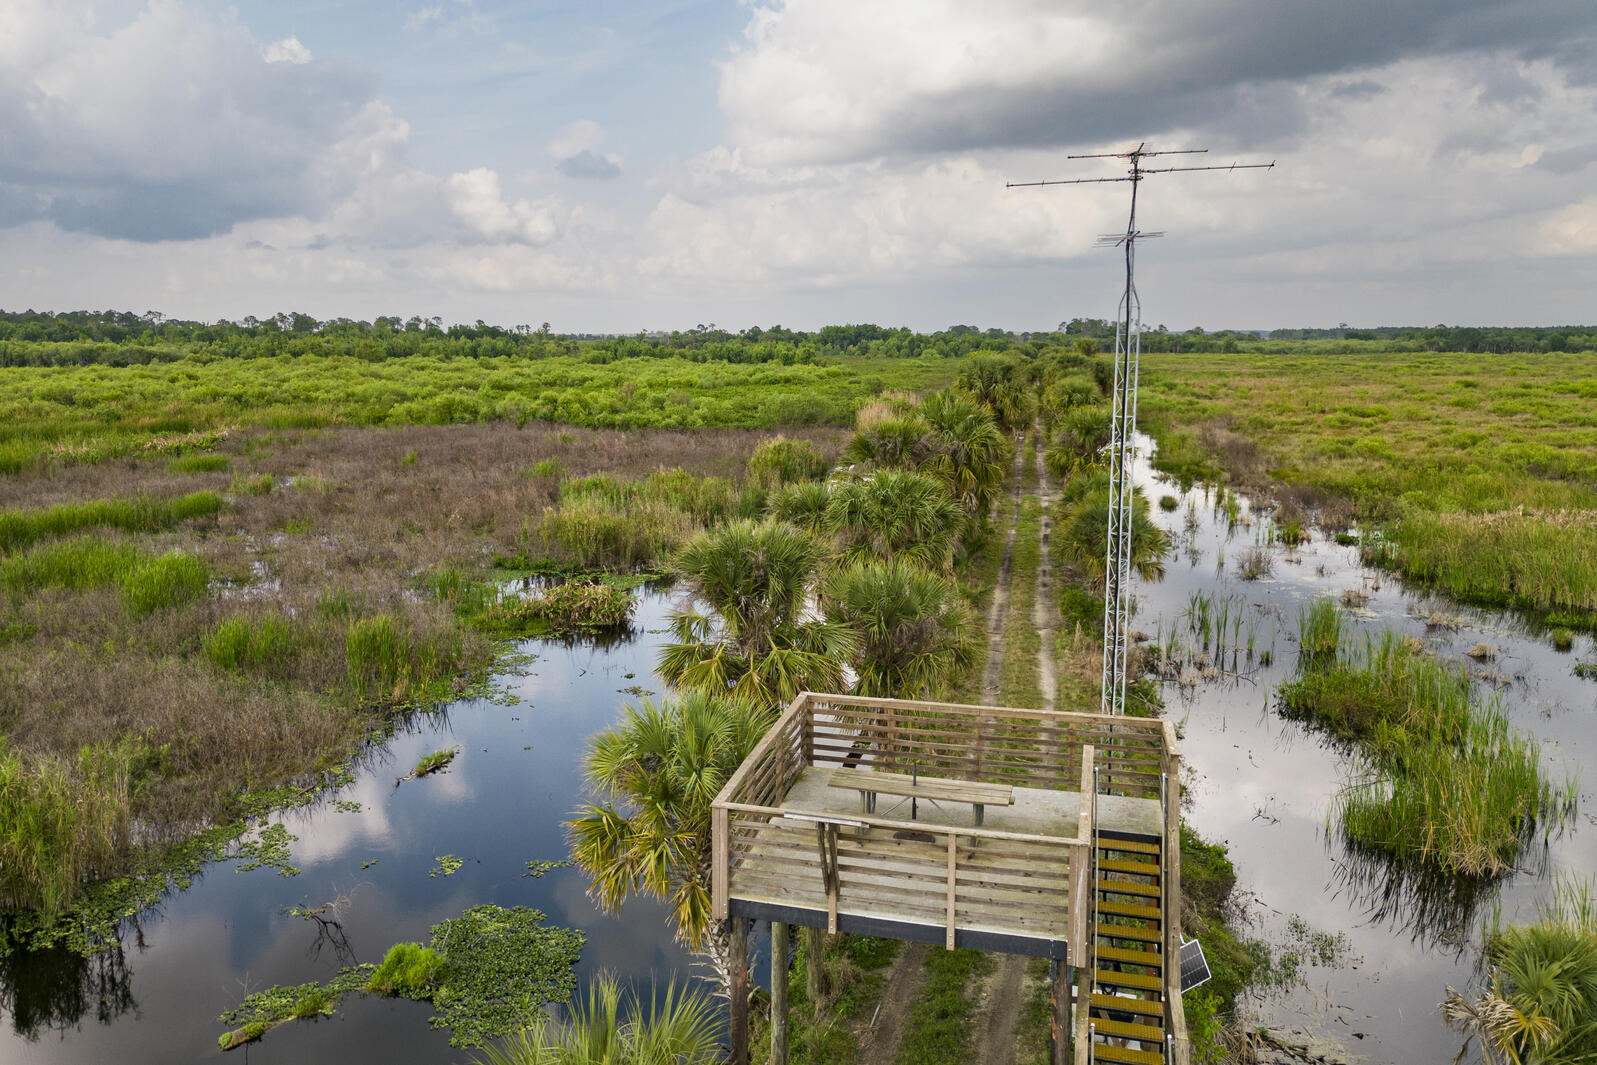 Aerial view of an elevated wooden structure with an antenna in a wetland